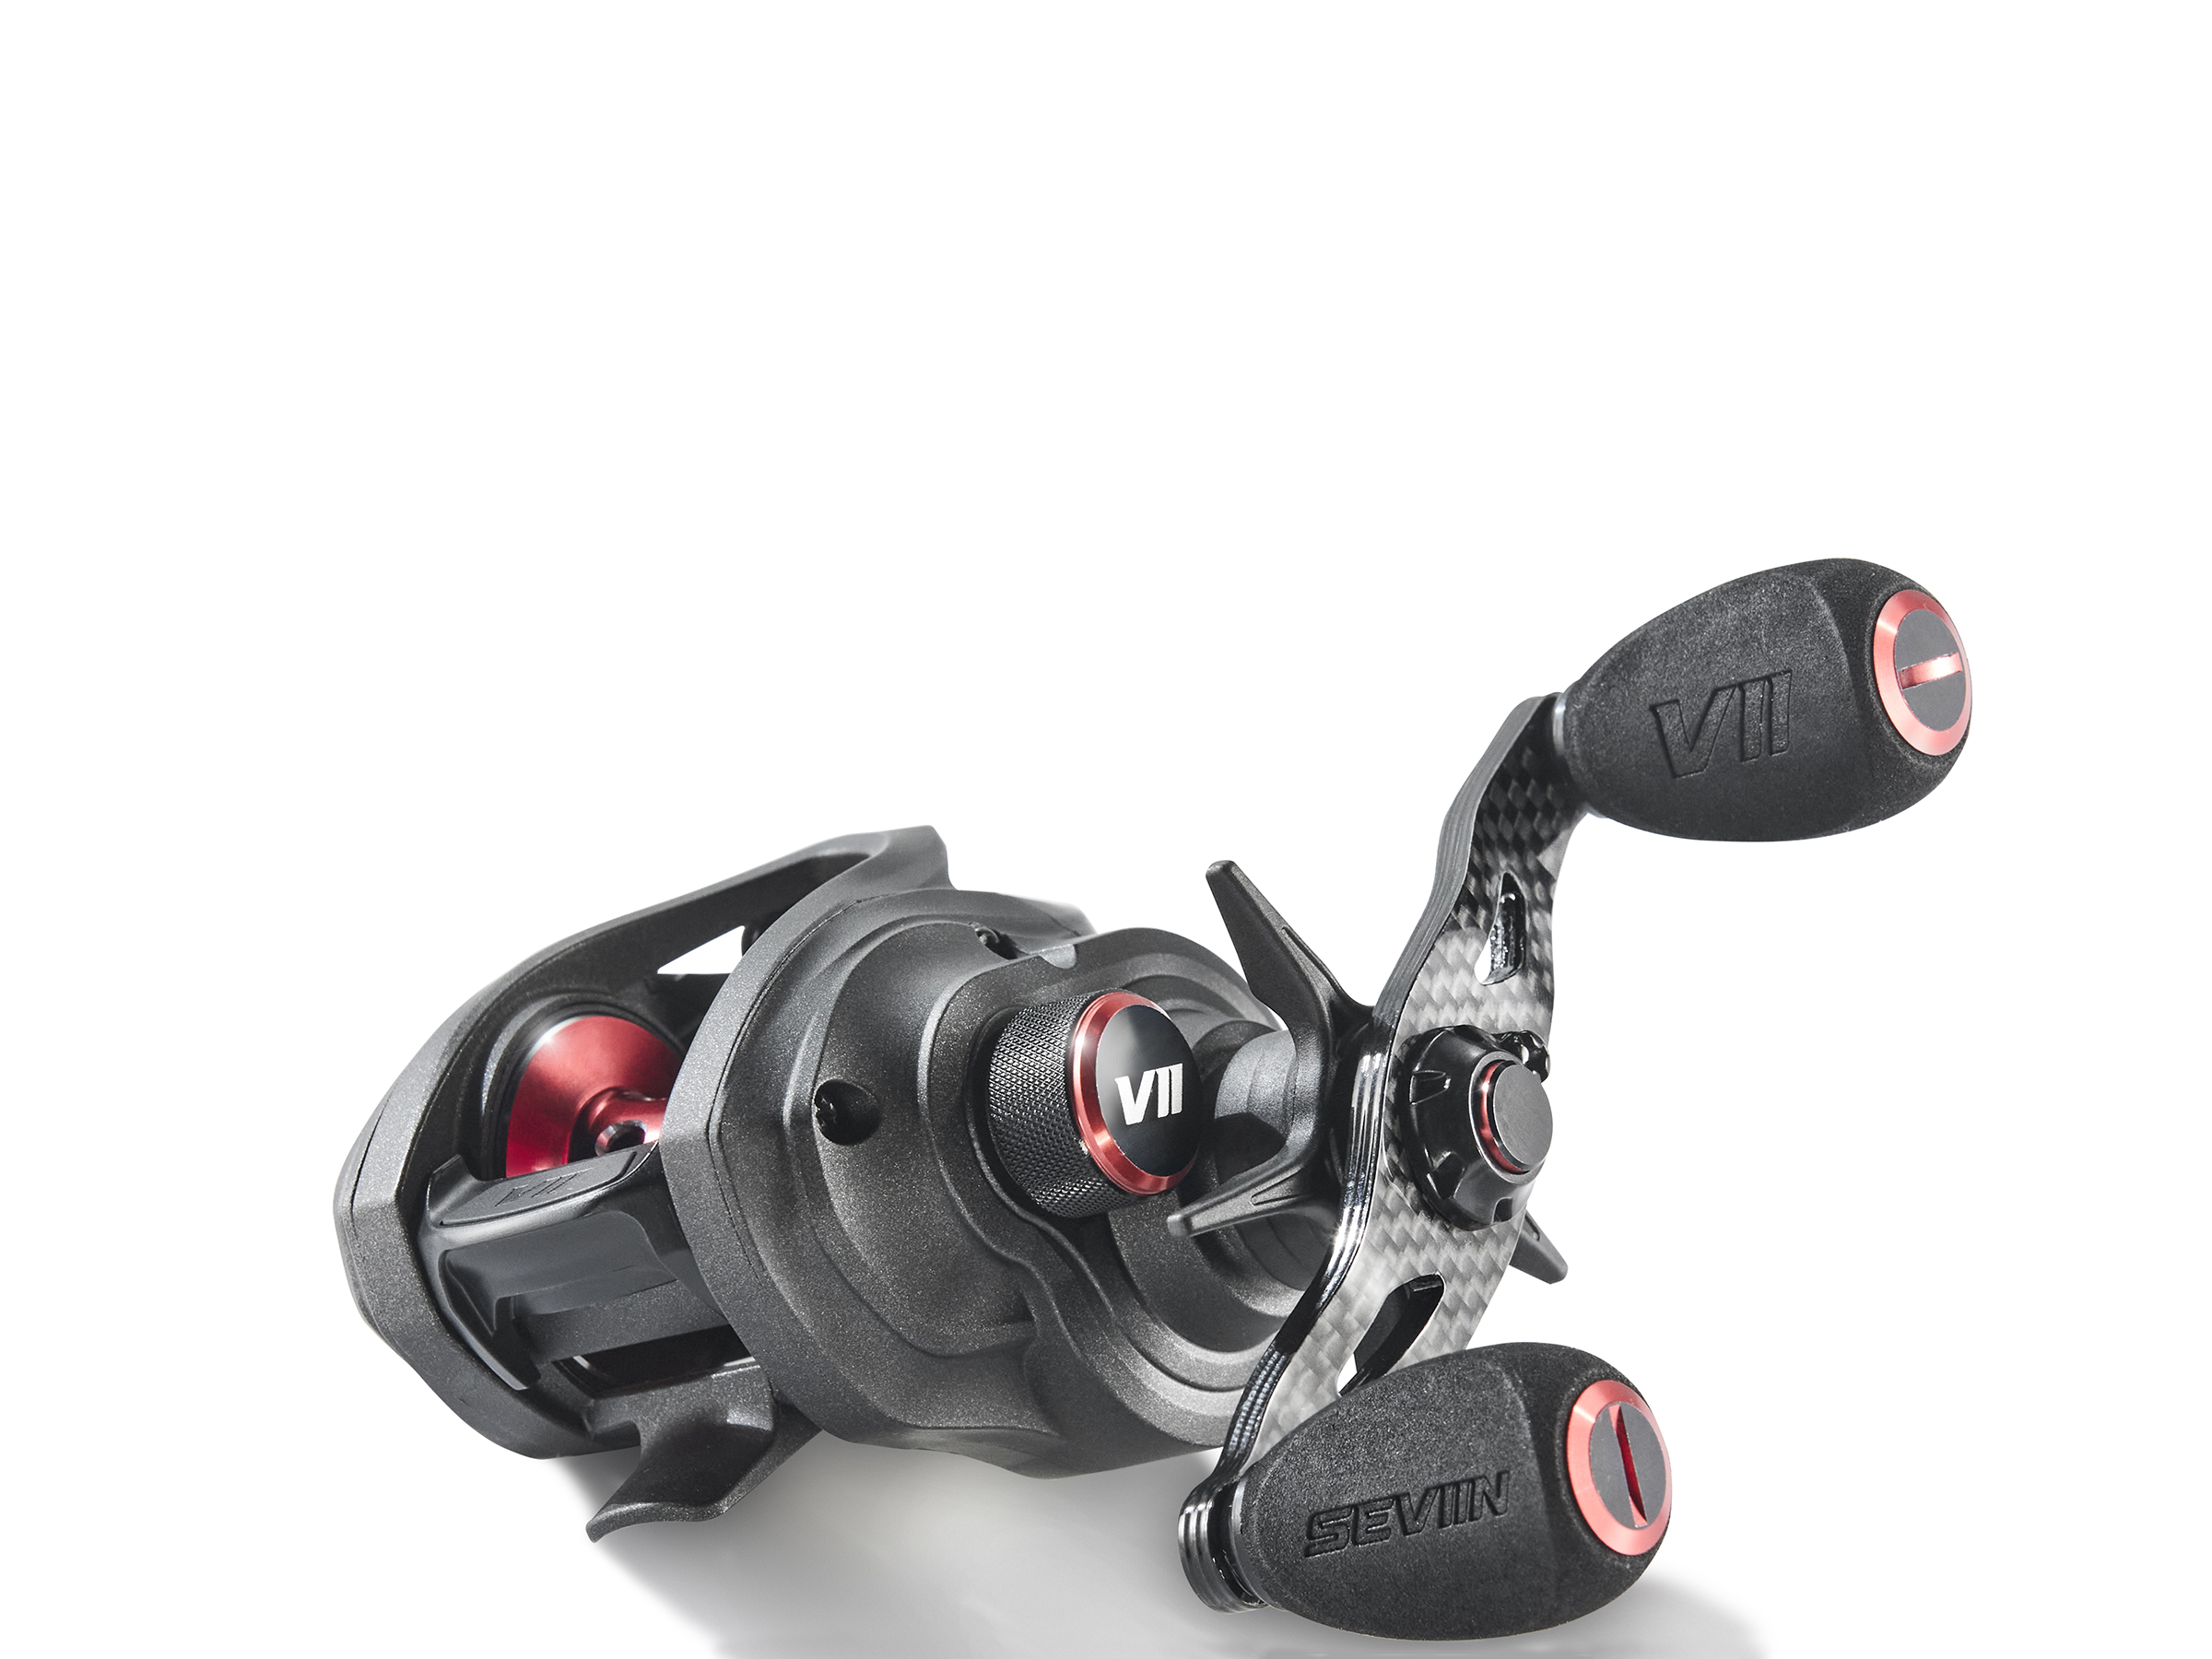 St. Croix Seviin GS Series Spinning Reels